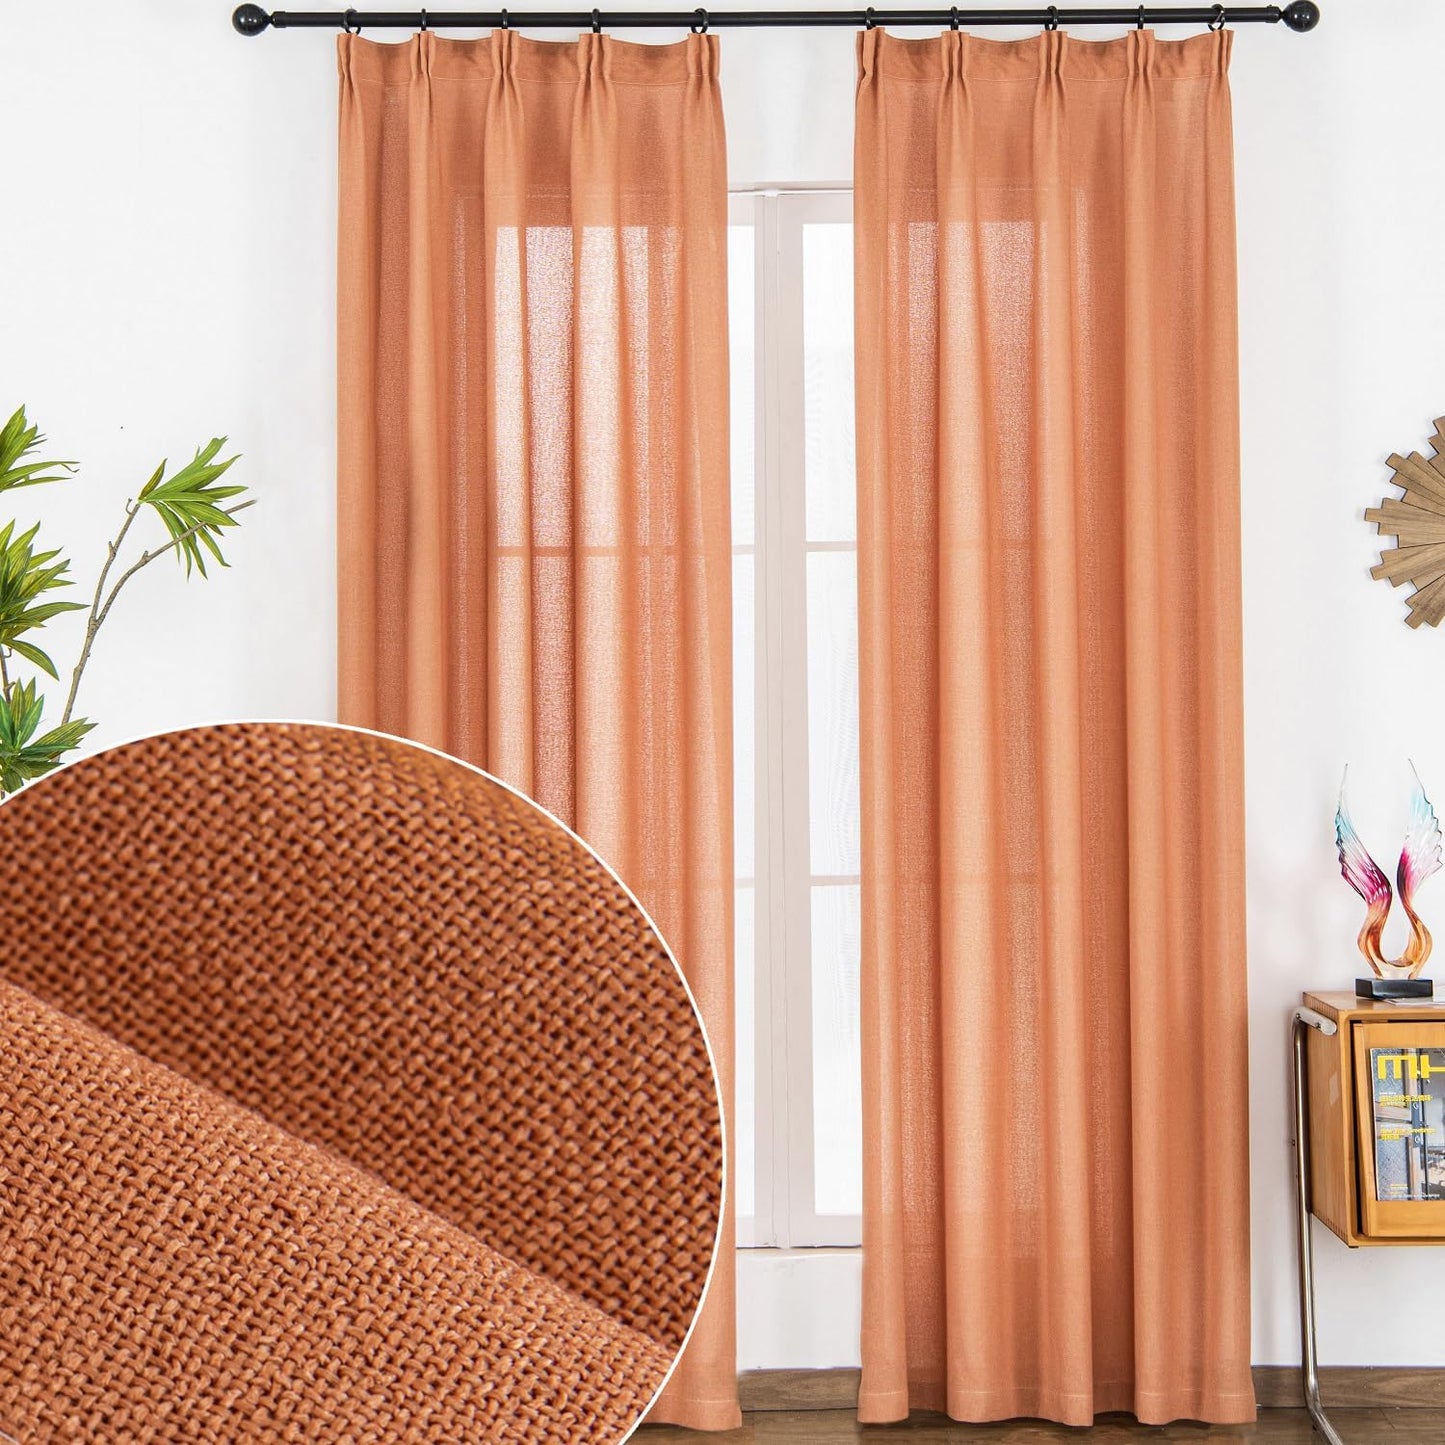 Ftinala Drapes 108 Inches Long 2 Panels Sheer Linen Curtains Pinch Pleat Curtain Hooks Floor to Ceiling Curtains 108 Inch Tan Extra Long Curtains Pleated Light Filtering Curtains Cream Beige  Ftinala Terracotta-Pleat Tape 50"W X 102"L 